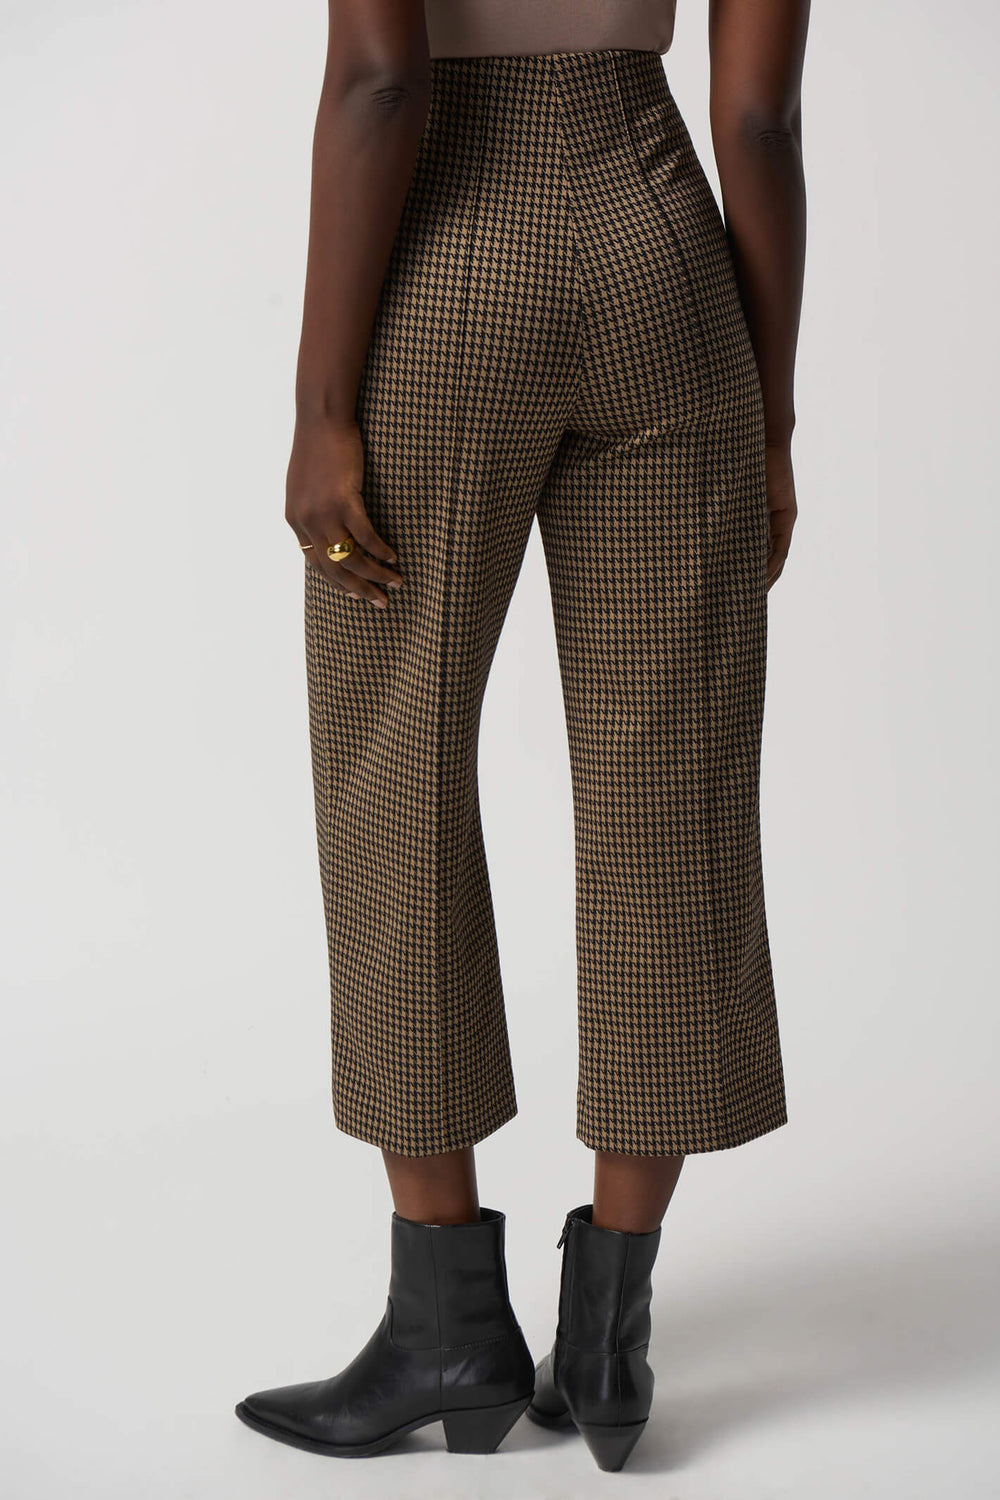 Joseph Ribkoff 233249 Black & Brown Houndstooth Wide Leg Trousers - Experience Boutique